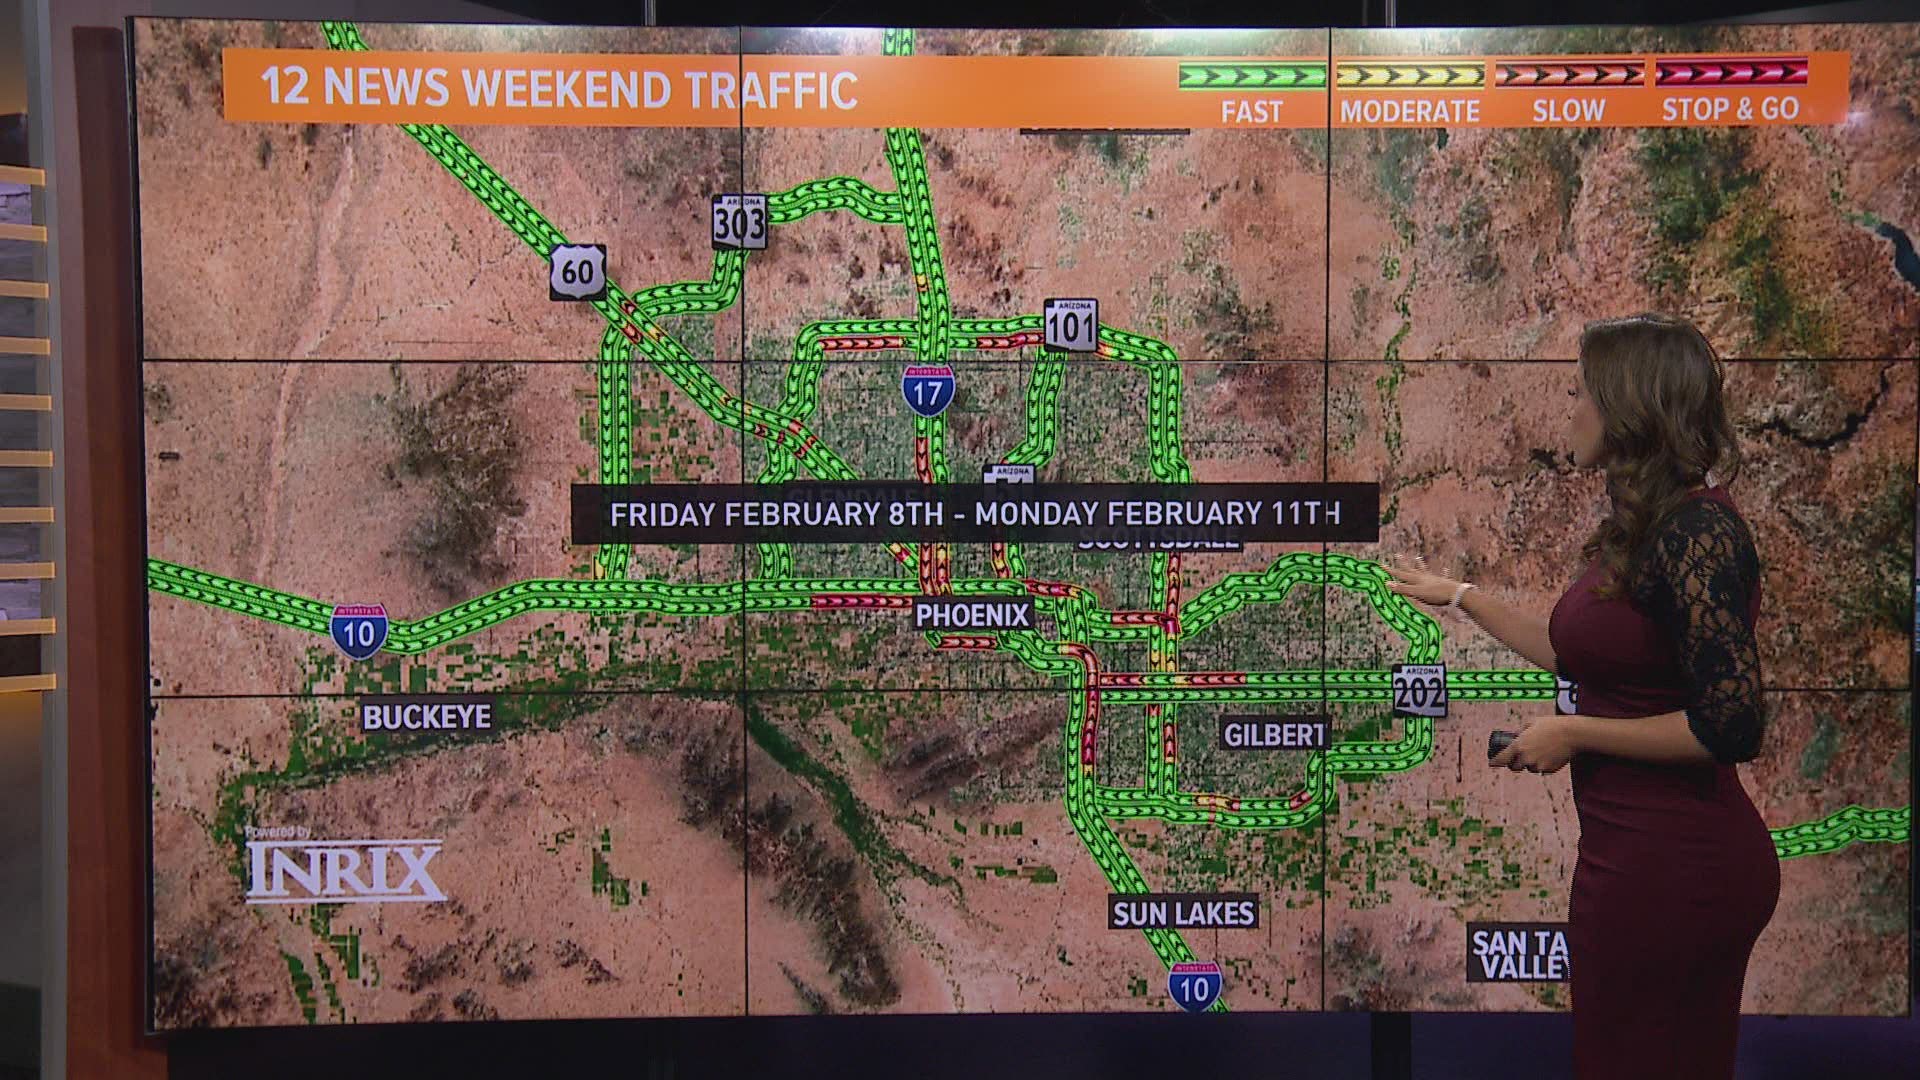 Here's your weekend traffic outlook for Feb. 8 - Feb. 11.